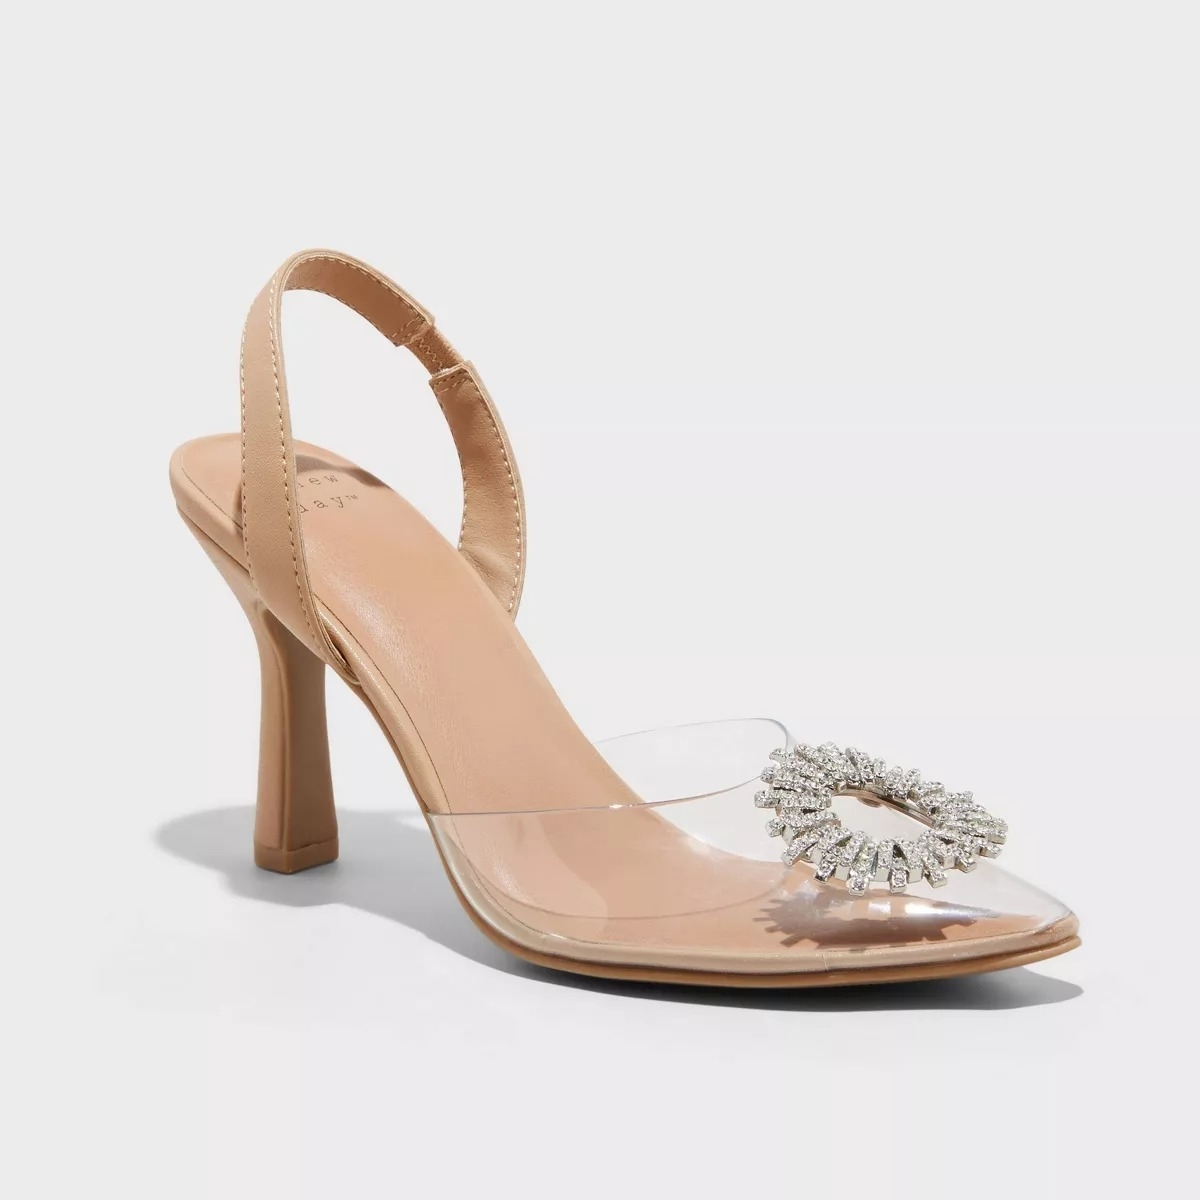 beige heel with clear toe and sparkly embellishment on toe